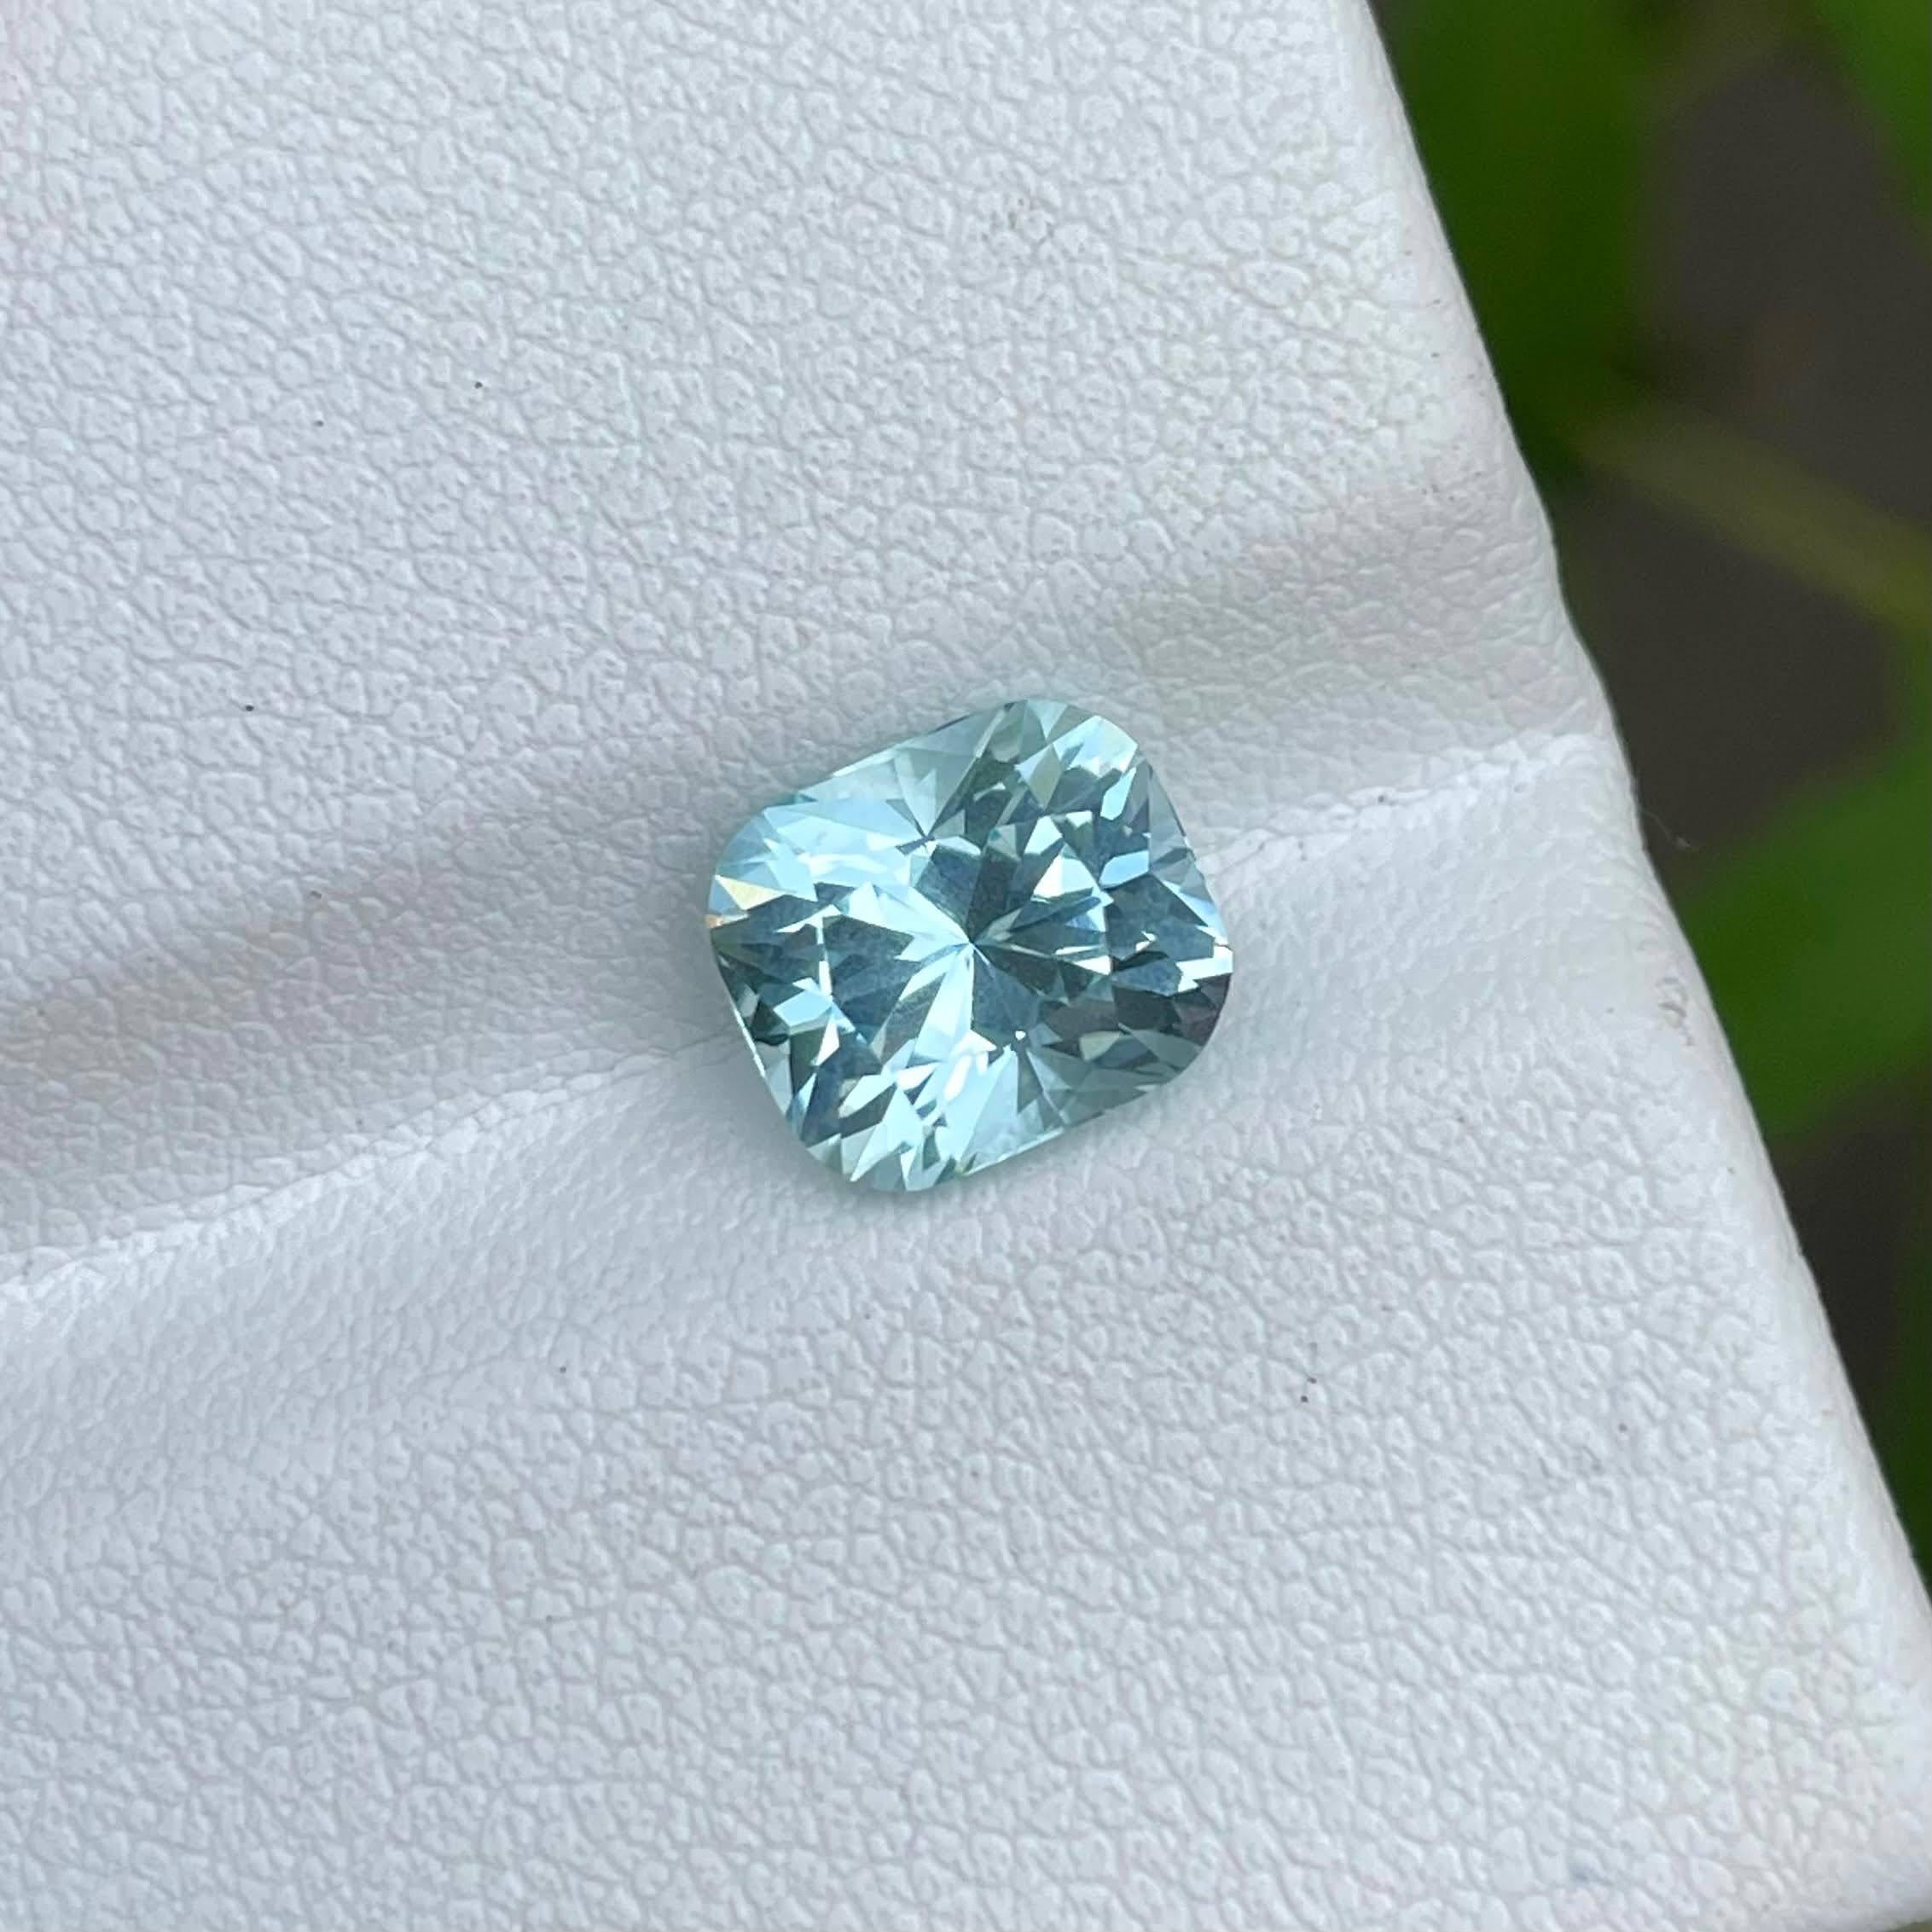 Weight 2.10 carats 
Dimensions 8.12x7.10x5.98 mm
Treatment none 
Origin Nigeria 
Clarity eye clean 
Shape cushion 
Cut custom precision 




This exquisite gemstone boasts a captivating 2.10 carat Aquamarine of unparalleled quality, sourced from the